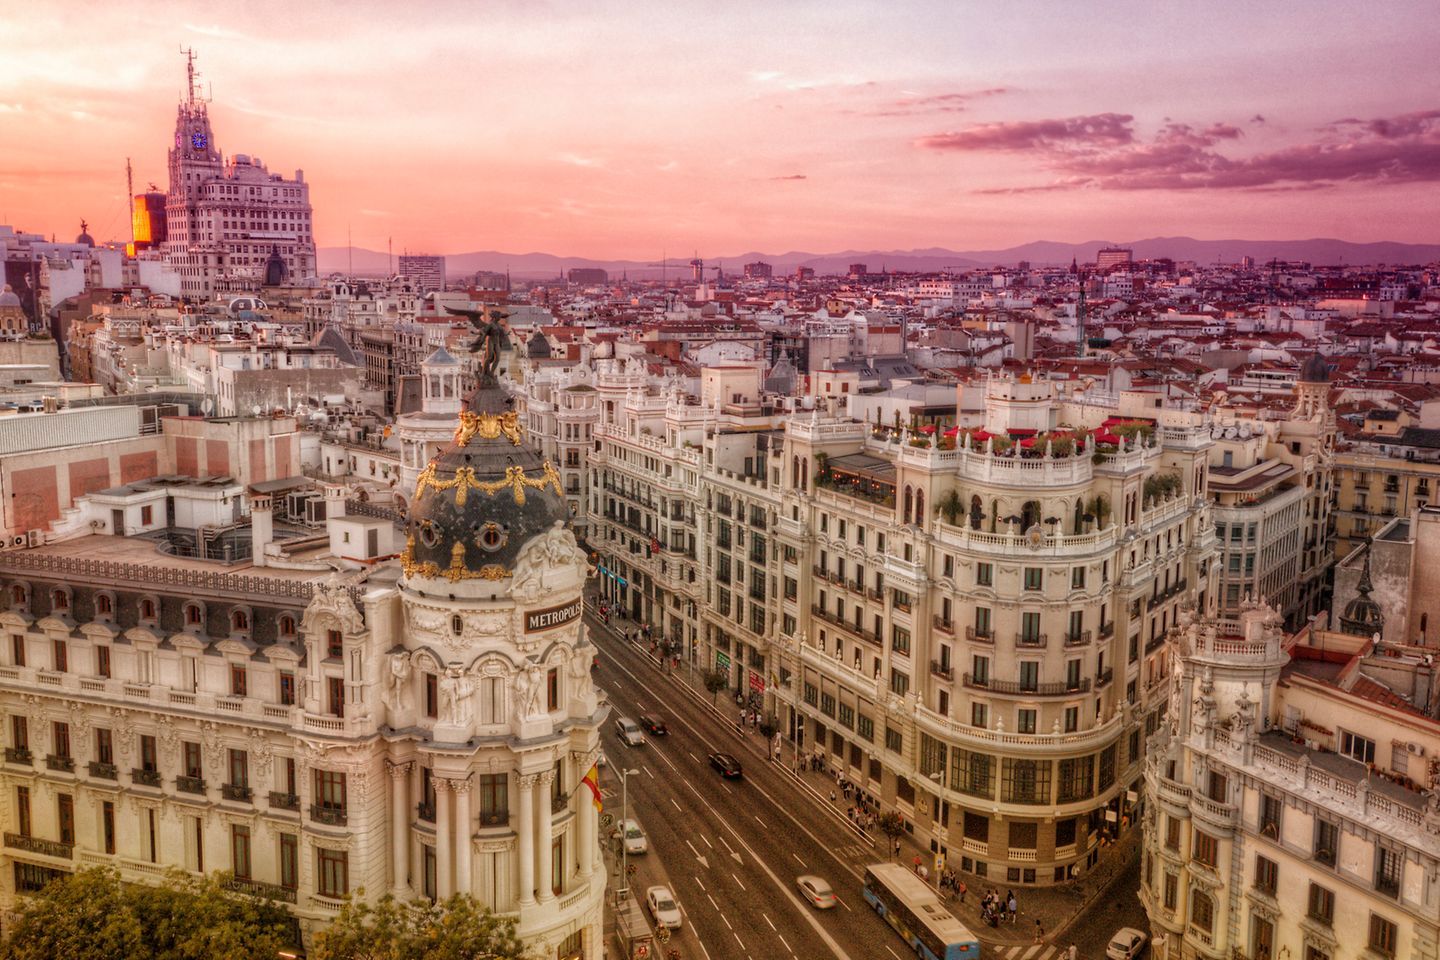 View over Madrid's Gran Via street in the evening sun